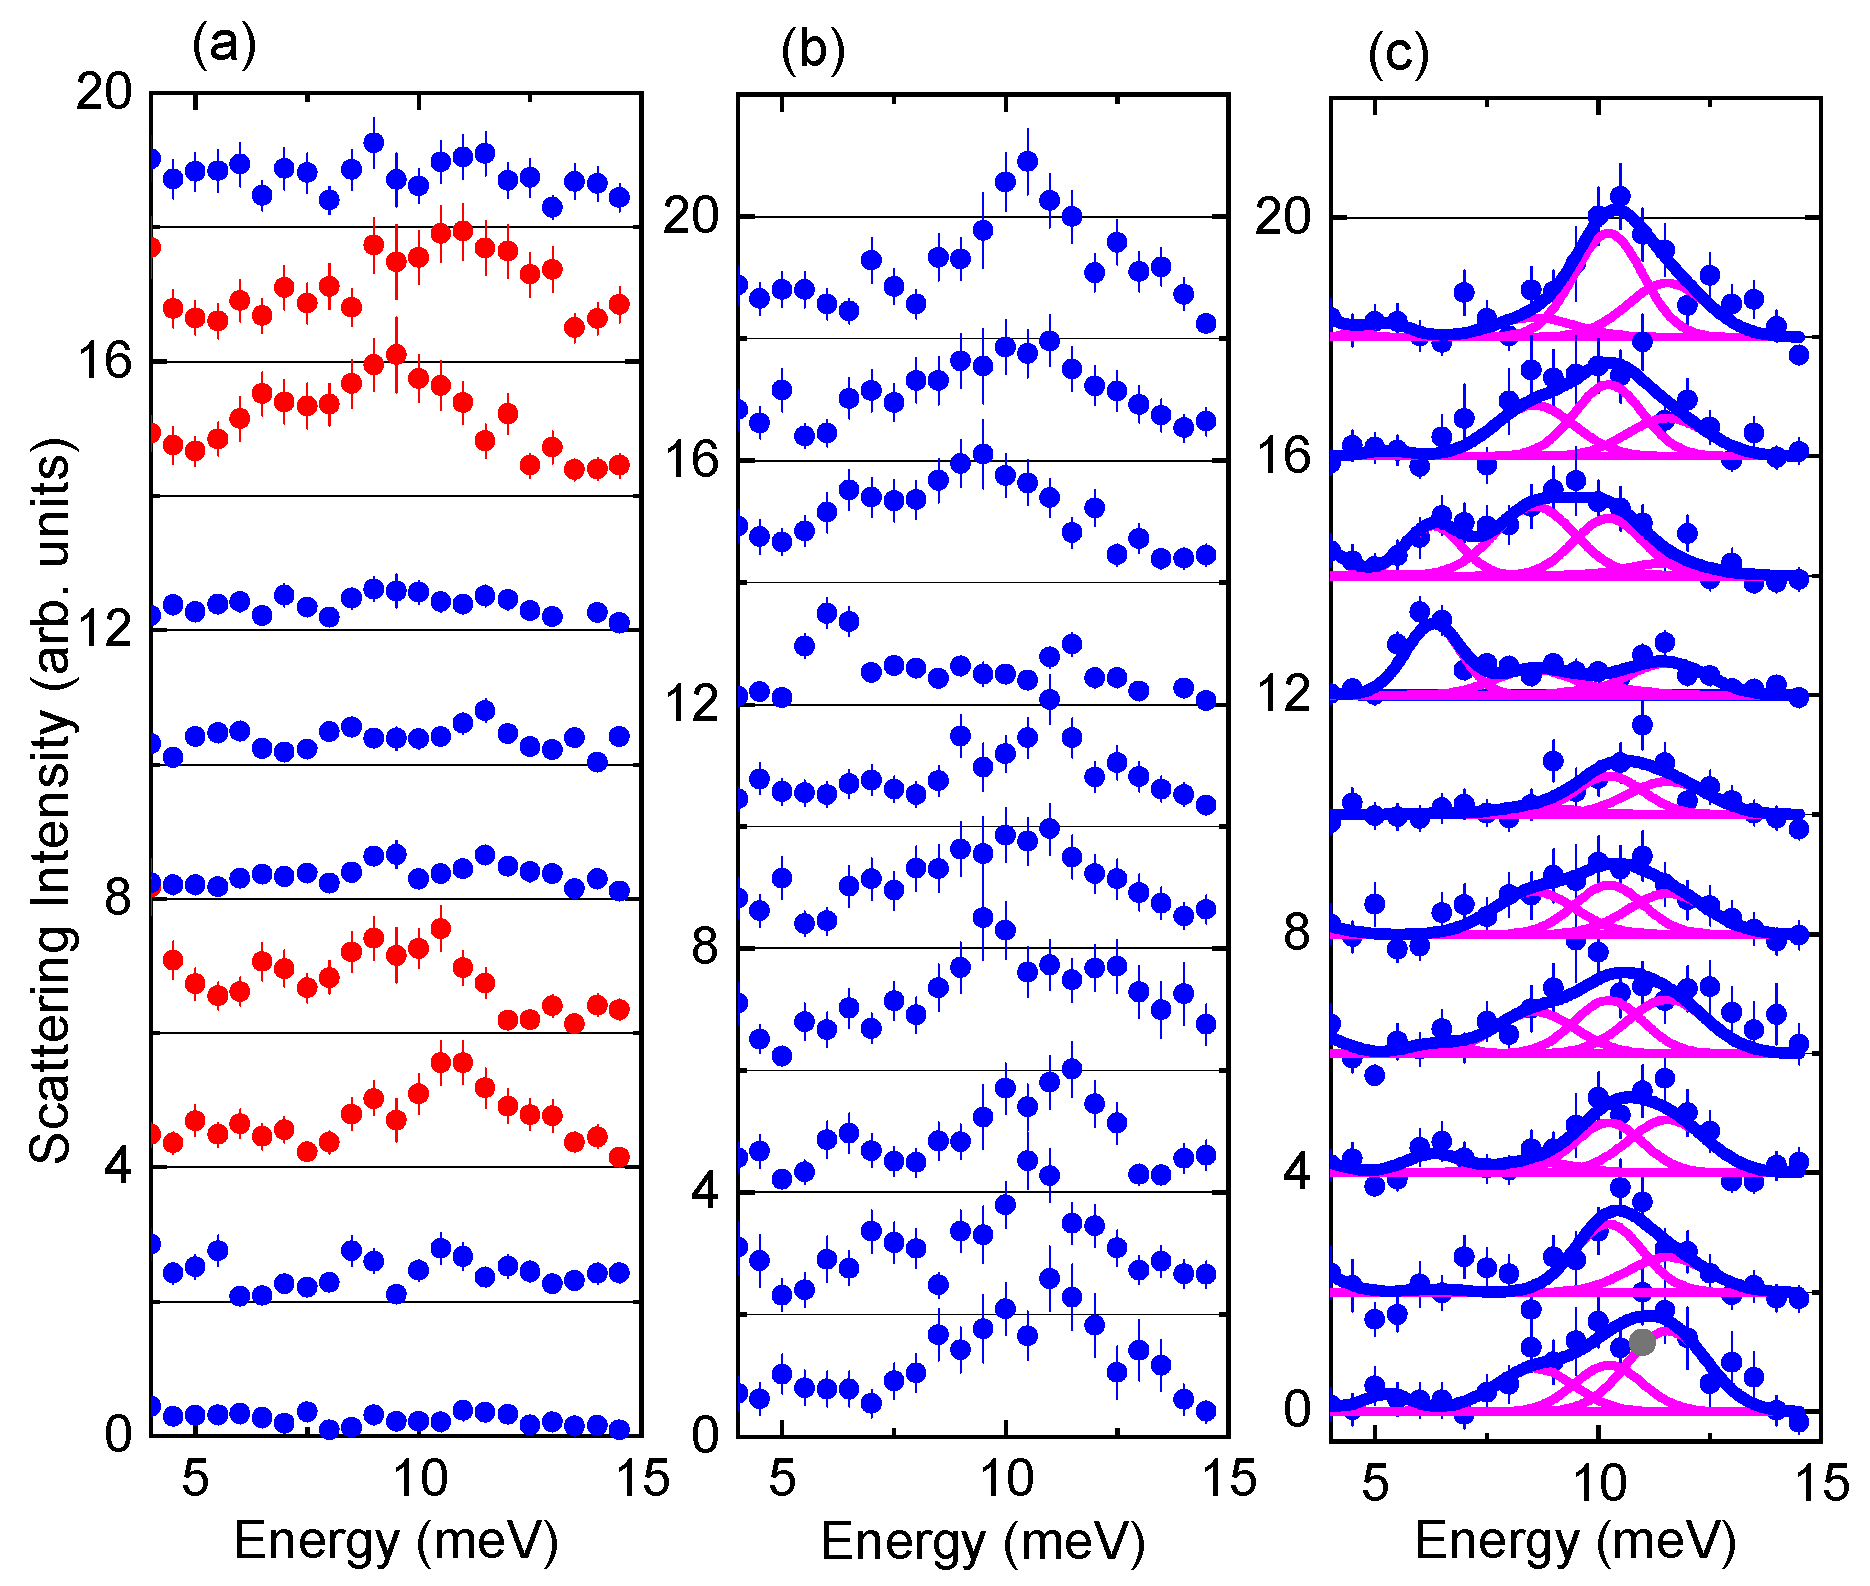 Zone center phonon data obtained from measured S (Q, ?) of Ba8Ga16Ge30. The binning was ?H = ?K = ?L = ±0.1 reciprocal lattice units (r.l.u.). The wavevectors (H,K,L) in order from top to bottom are: (a) Q = (2,-1,-3), (-2,-1,-7), (-2,-1-9), (-4,0-11), (-4,0,-3), (-4,0,-4), (-4,0,-6), (-1,0,-10), (-10,-9,2), (-7,-9,3); For (b, c): Q = (-9,-10,-4), (-8,-7,-10), (-7,-8,-9), (-1,-4,-3), (-10,-9,2), (-3,-4,-9), (-5,-9,-8), (-6,-8,-9), (-7,-10,-2), (-1,0,-10). (a, b) data points represent raw data. (c) data points represent background-subtracted data. Magenta curves represent individual phonon peaks determined through the multizone fit. Blue curves are fit results. Peak positions based on the fit are: 5.3 ± 0.1, 6.3 ± 0.1 8.6 ± 0.15, 10.2 ± 0.1, and 11.6 ± 0.2 meV.